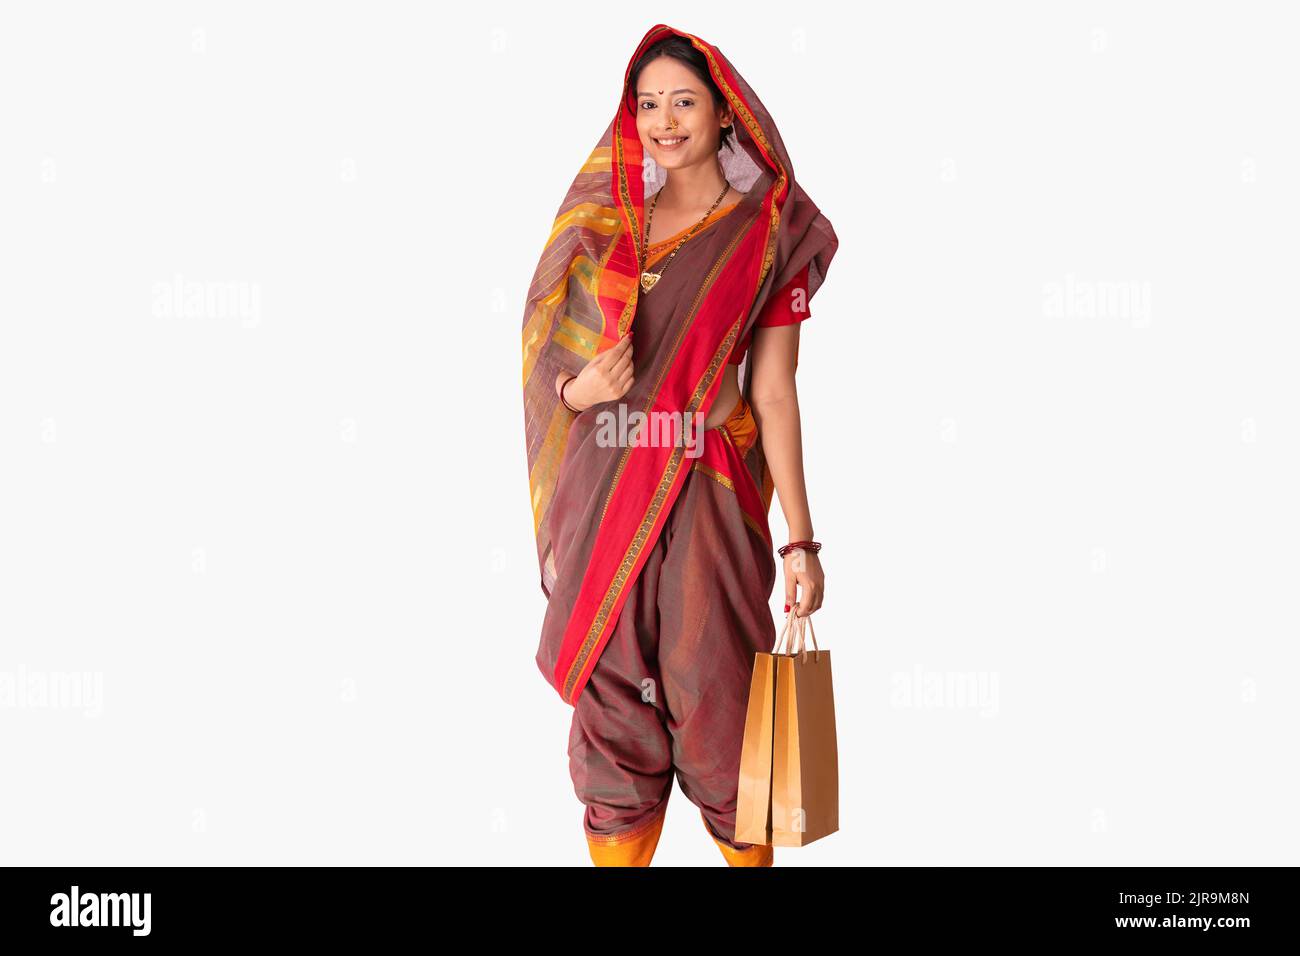 Portrait of a Maharashtrian woman in traditional outfit holding shopping bags Stock Photo